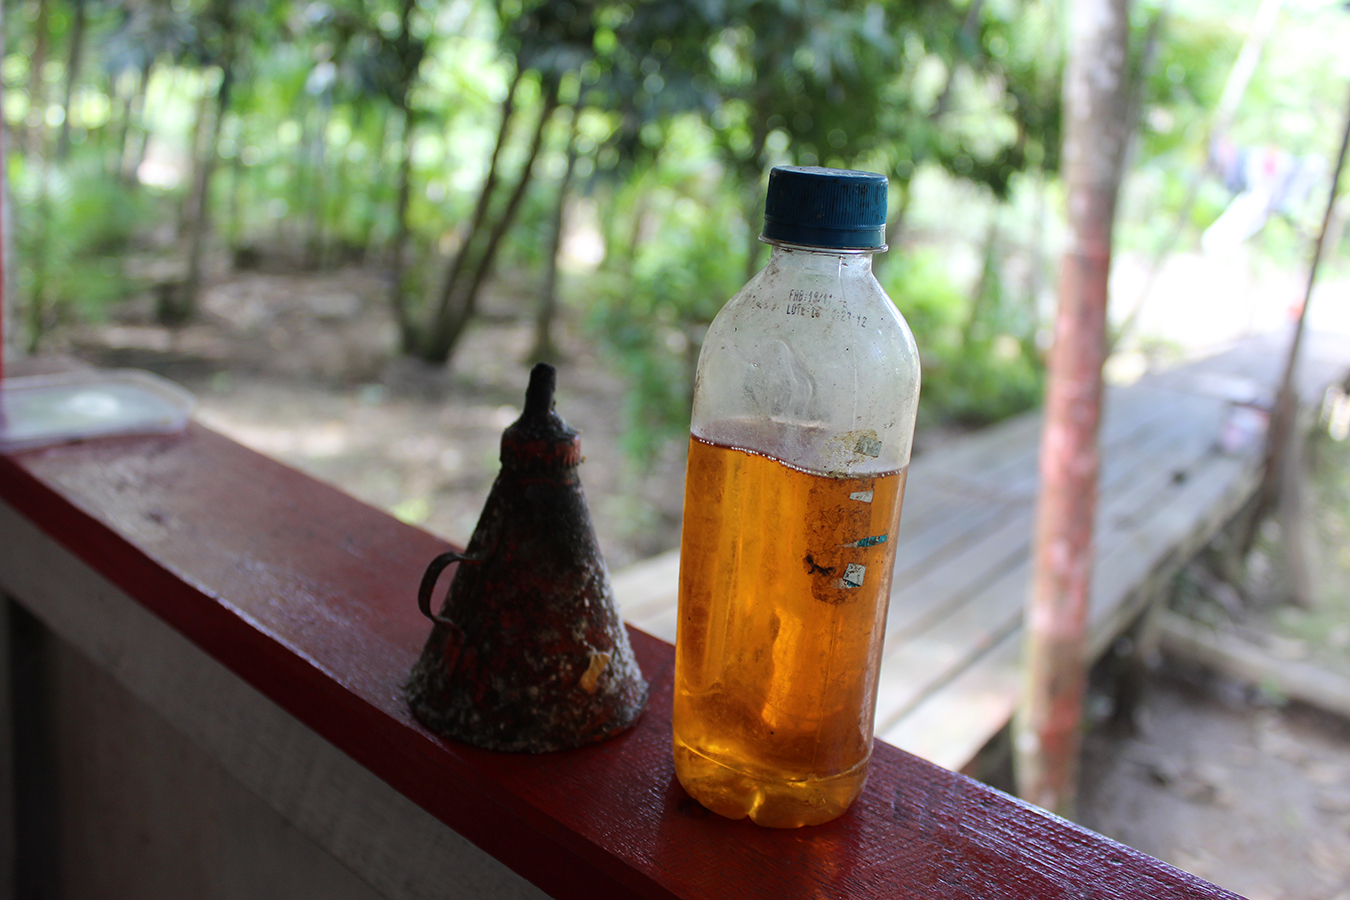 Andiroba oil extracted from Carapa guainensis, a colonial-era droga do sertão and household remedy for inflammation also once used for lantern oil. Photo by Matthew Abel, January 2020.